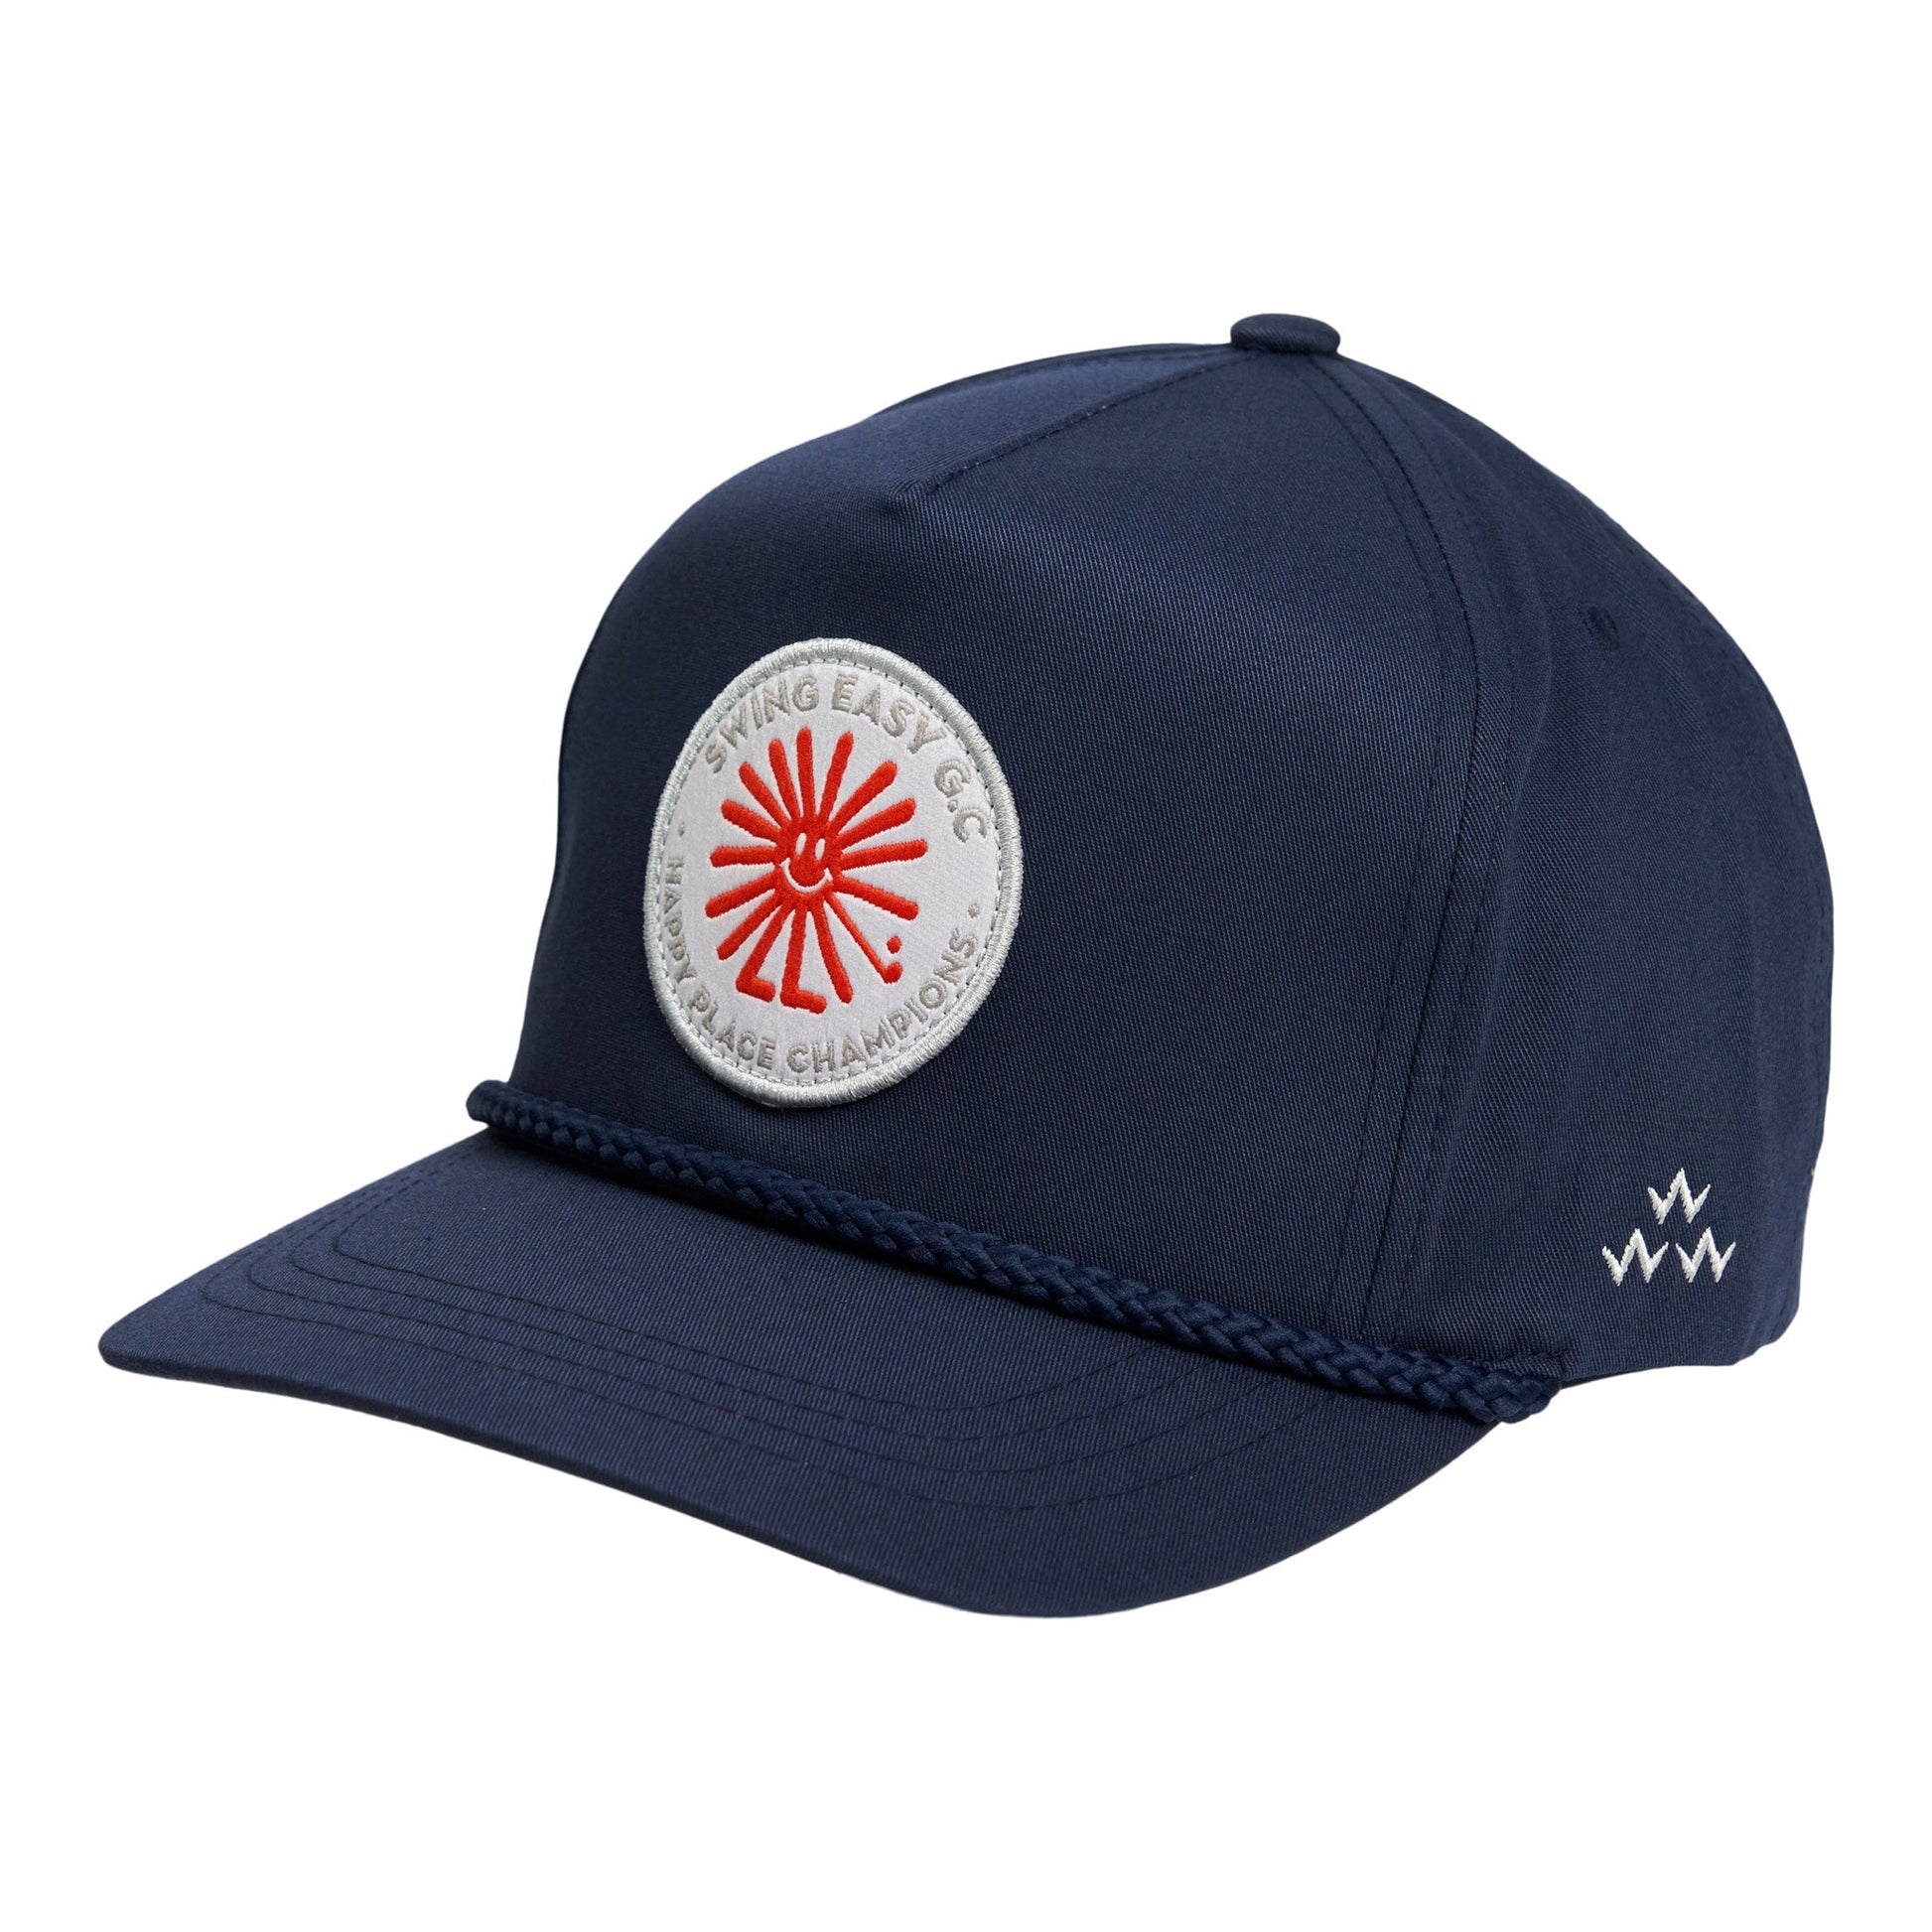 birds-of-condor-navy-blue-red-swing-easy-golf-club-happy-place-champions-fifa-world-cup-football-fly-condor-golf-snapback-hat-cap-front